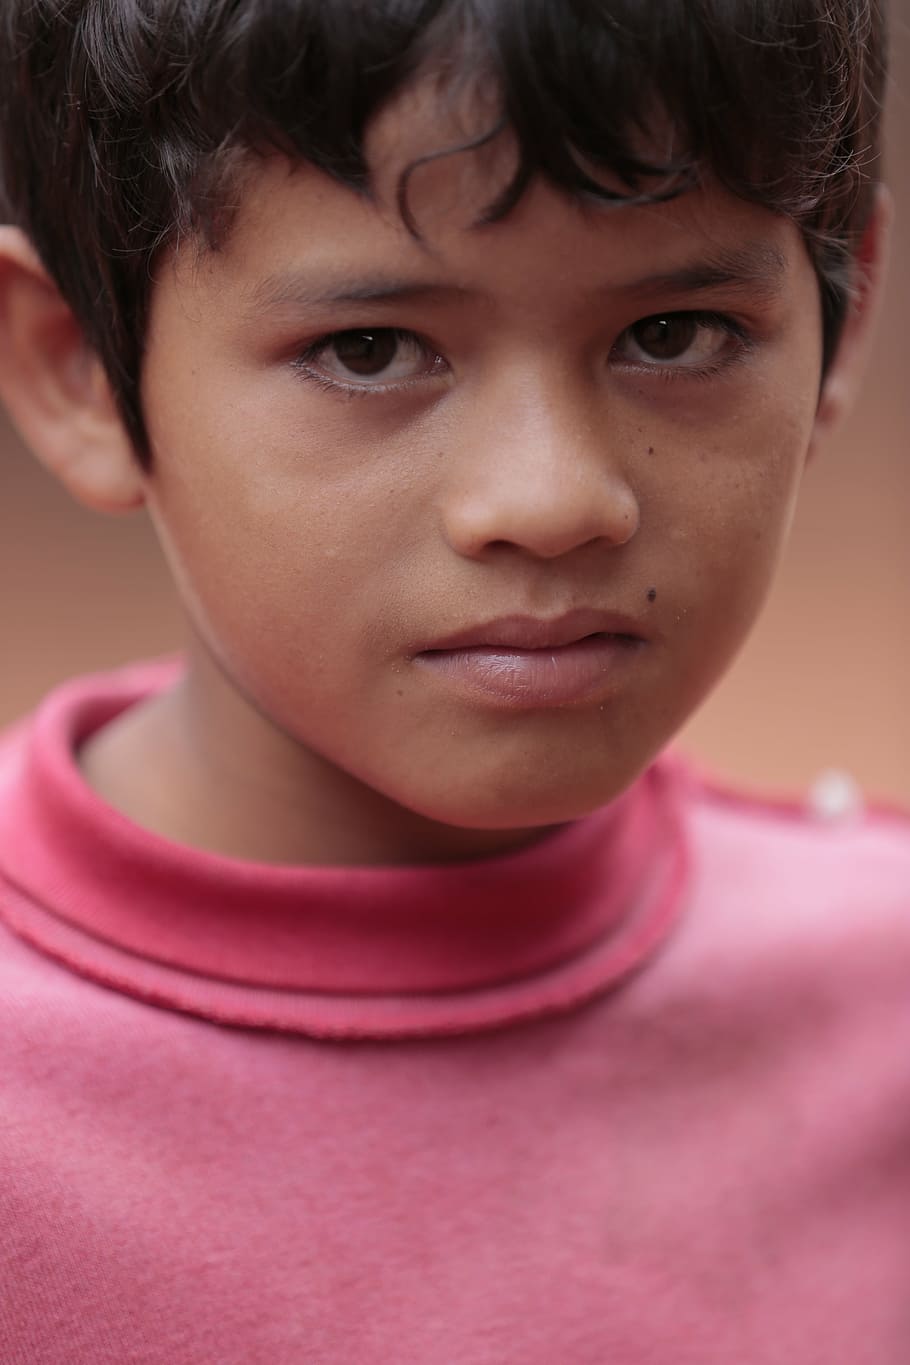 child, look, portrait, eyes, faces, people, reflective look, think, poverty, seriously